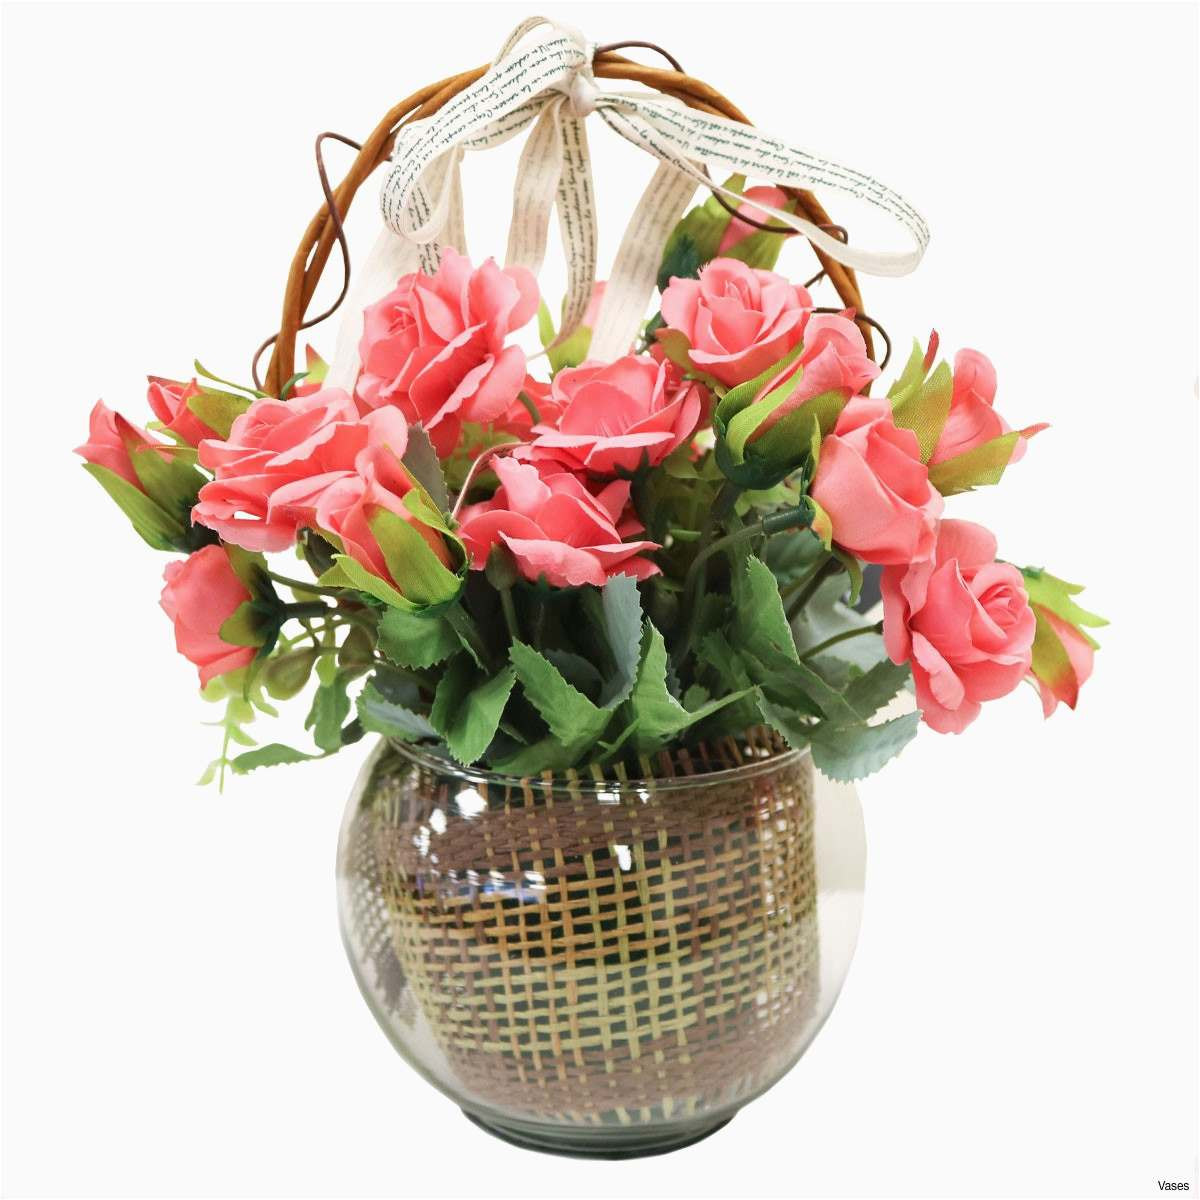 24 Great Diy Flower Vase 2024 free download diy flower vase of christmas flowers amazing merry christmas sign coloring pages best in christmas flowers amazing bf142 11km 1200x1200h vases pink flower vase i 0d gold inspiration elegant